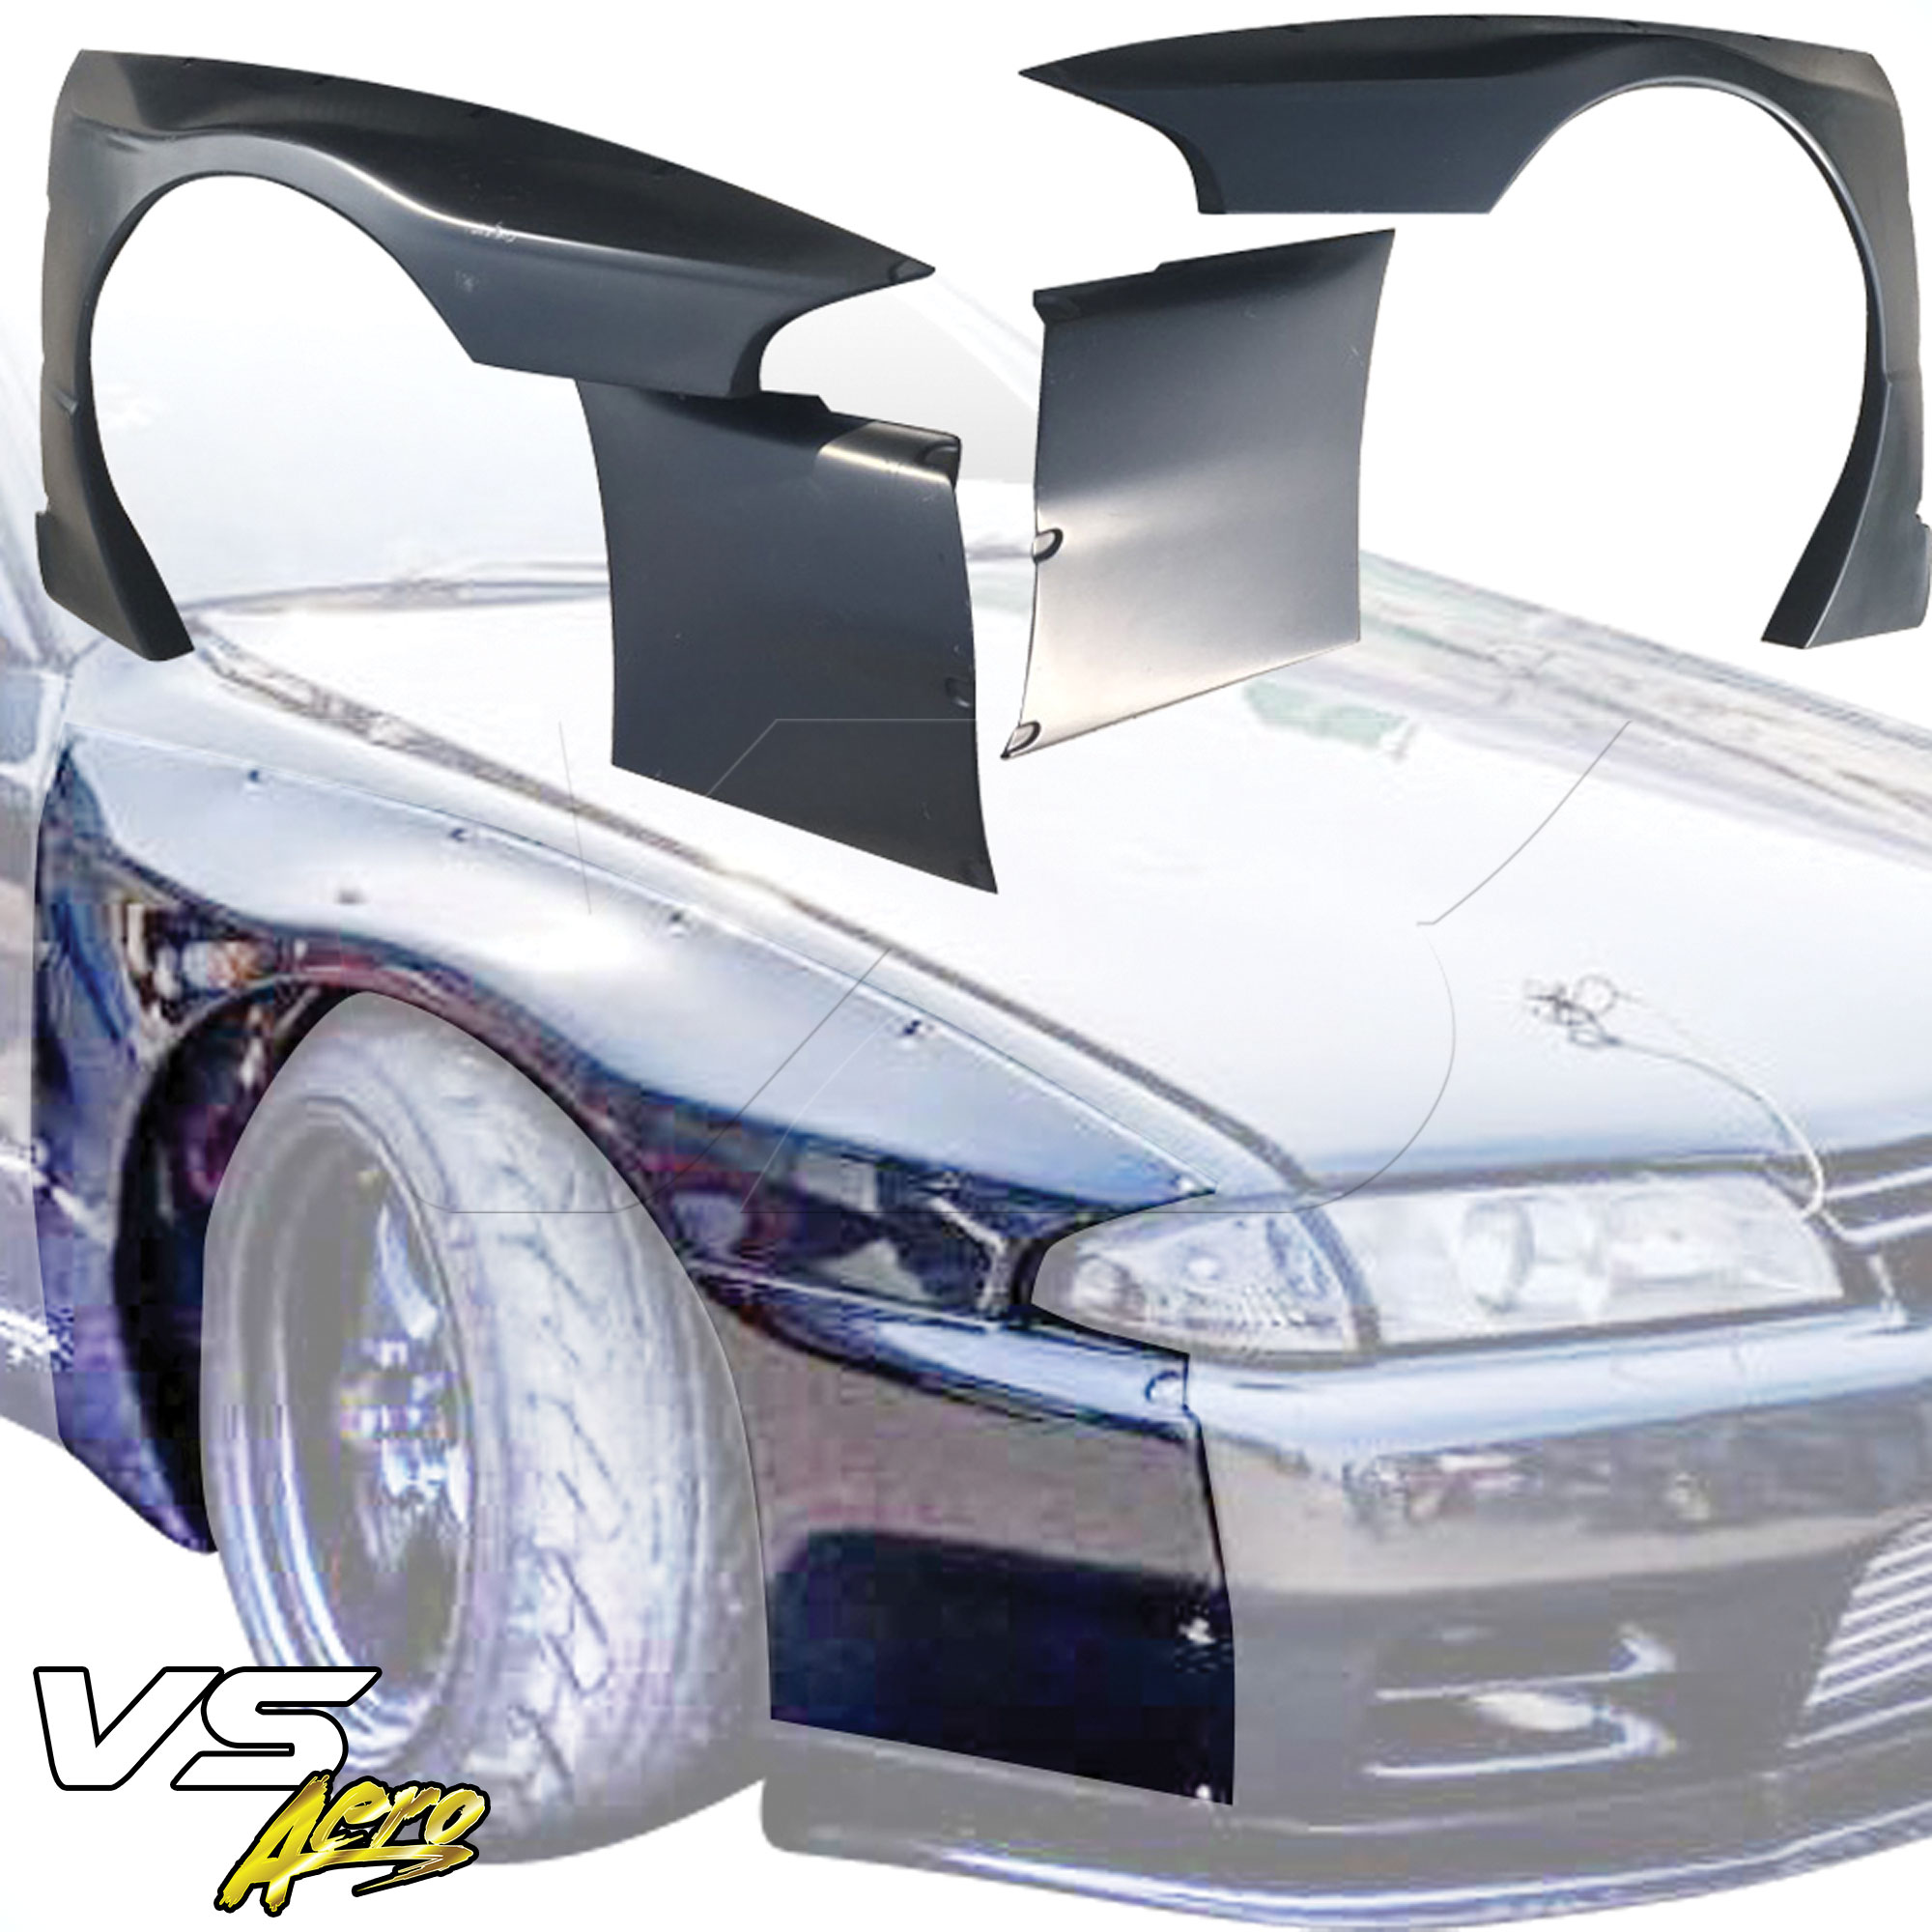 VSaero FRP TKYO Wide Body 40mm Fender Flares (front) 4pc > Nissan Skyline R32 1990-1994 > 2dr Coupe - Image 19